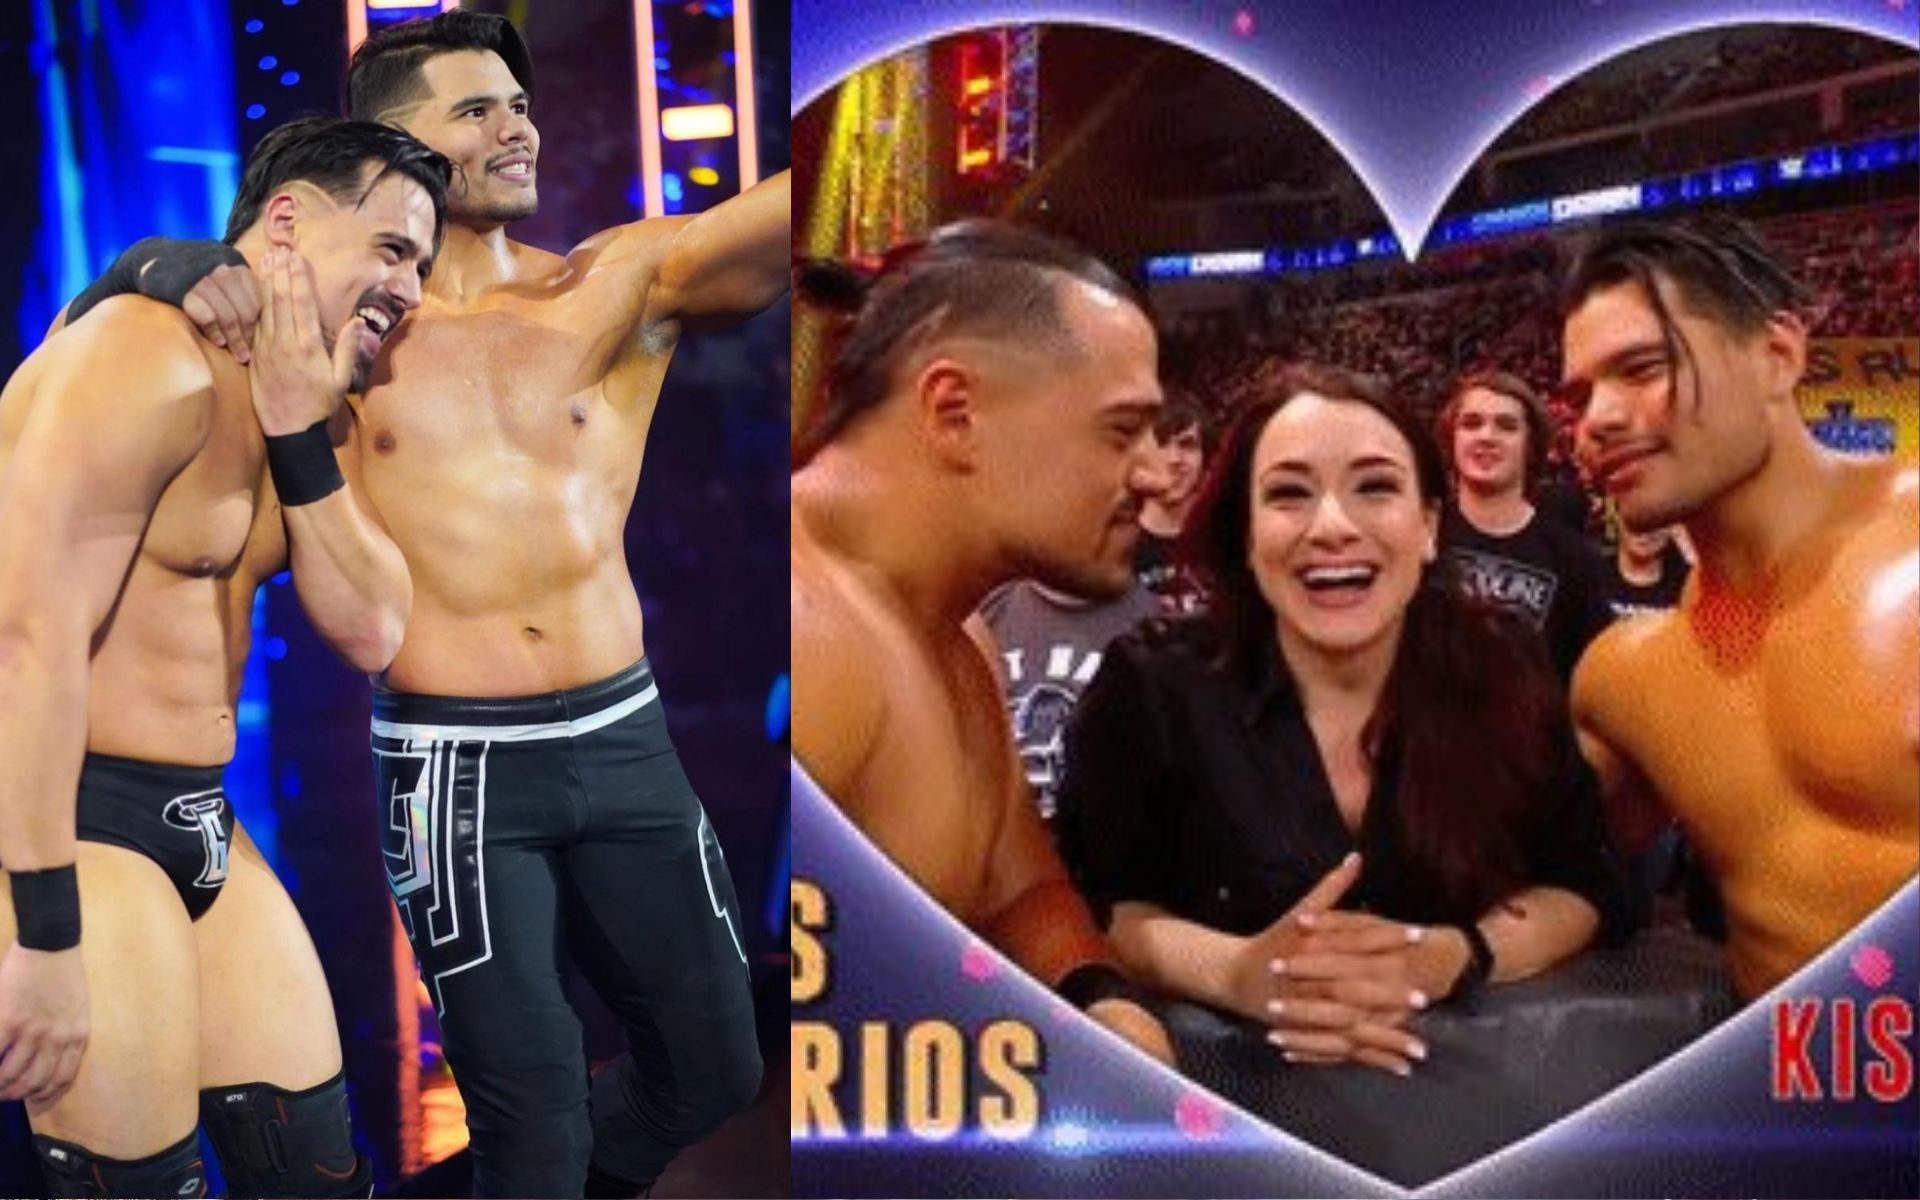 Los Lotharios have one of the most entertaining segments during their entrance with the Kiss Cam.